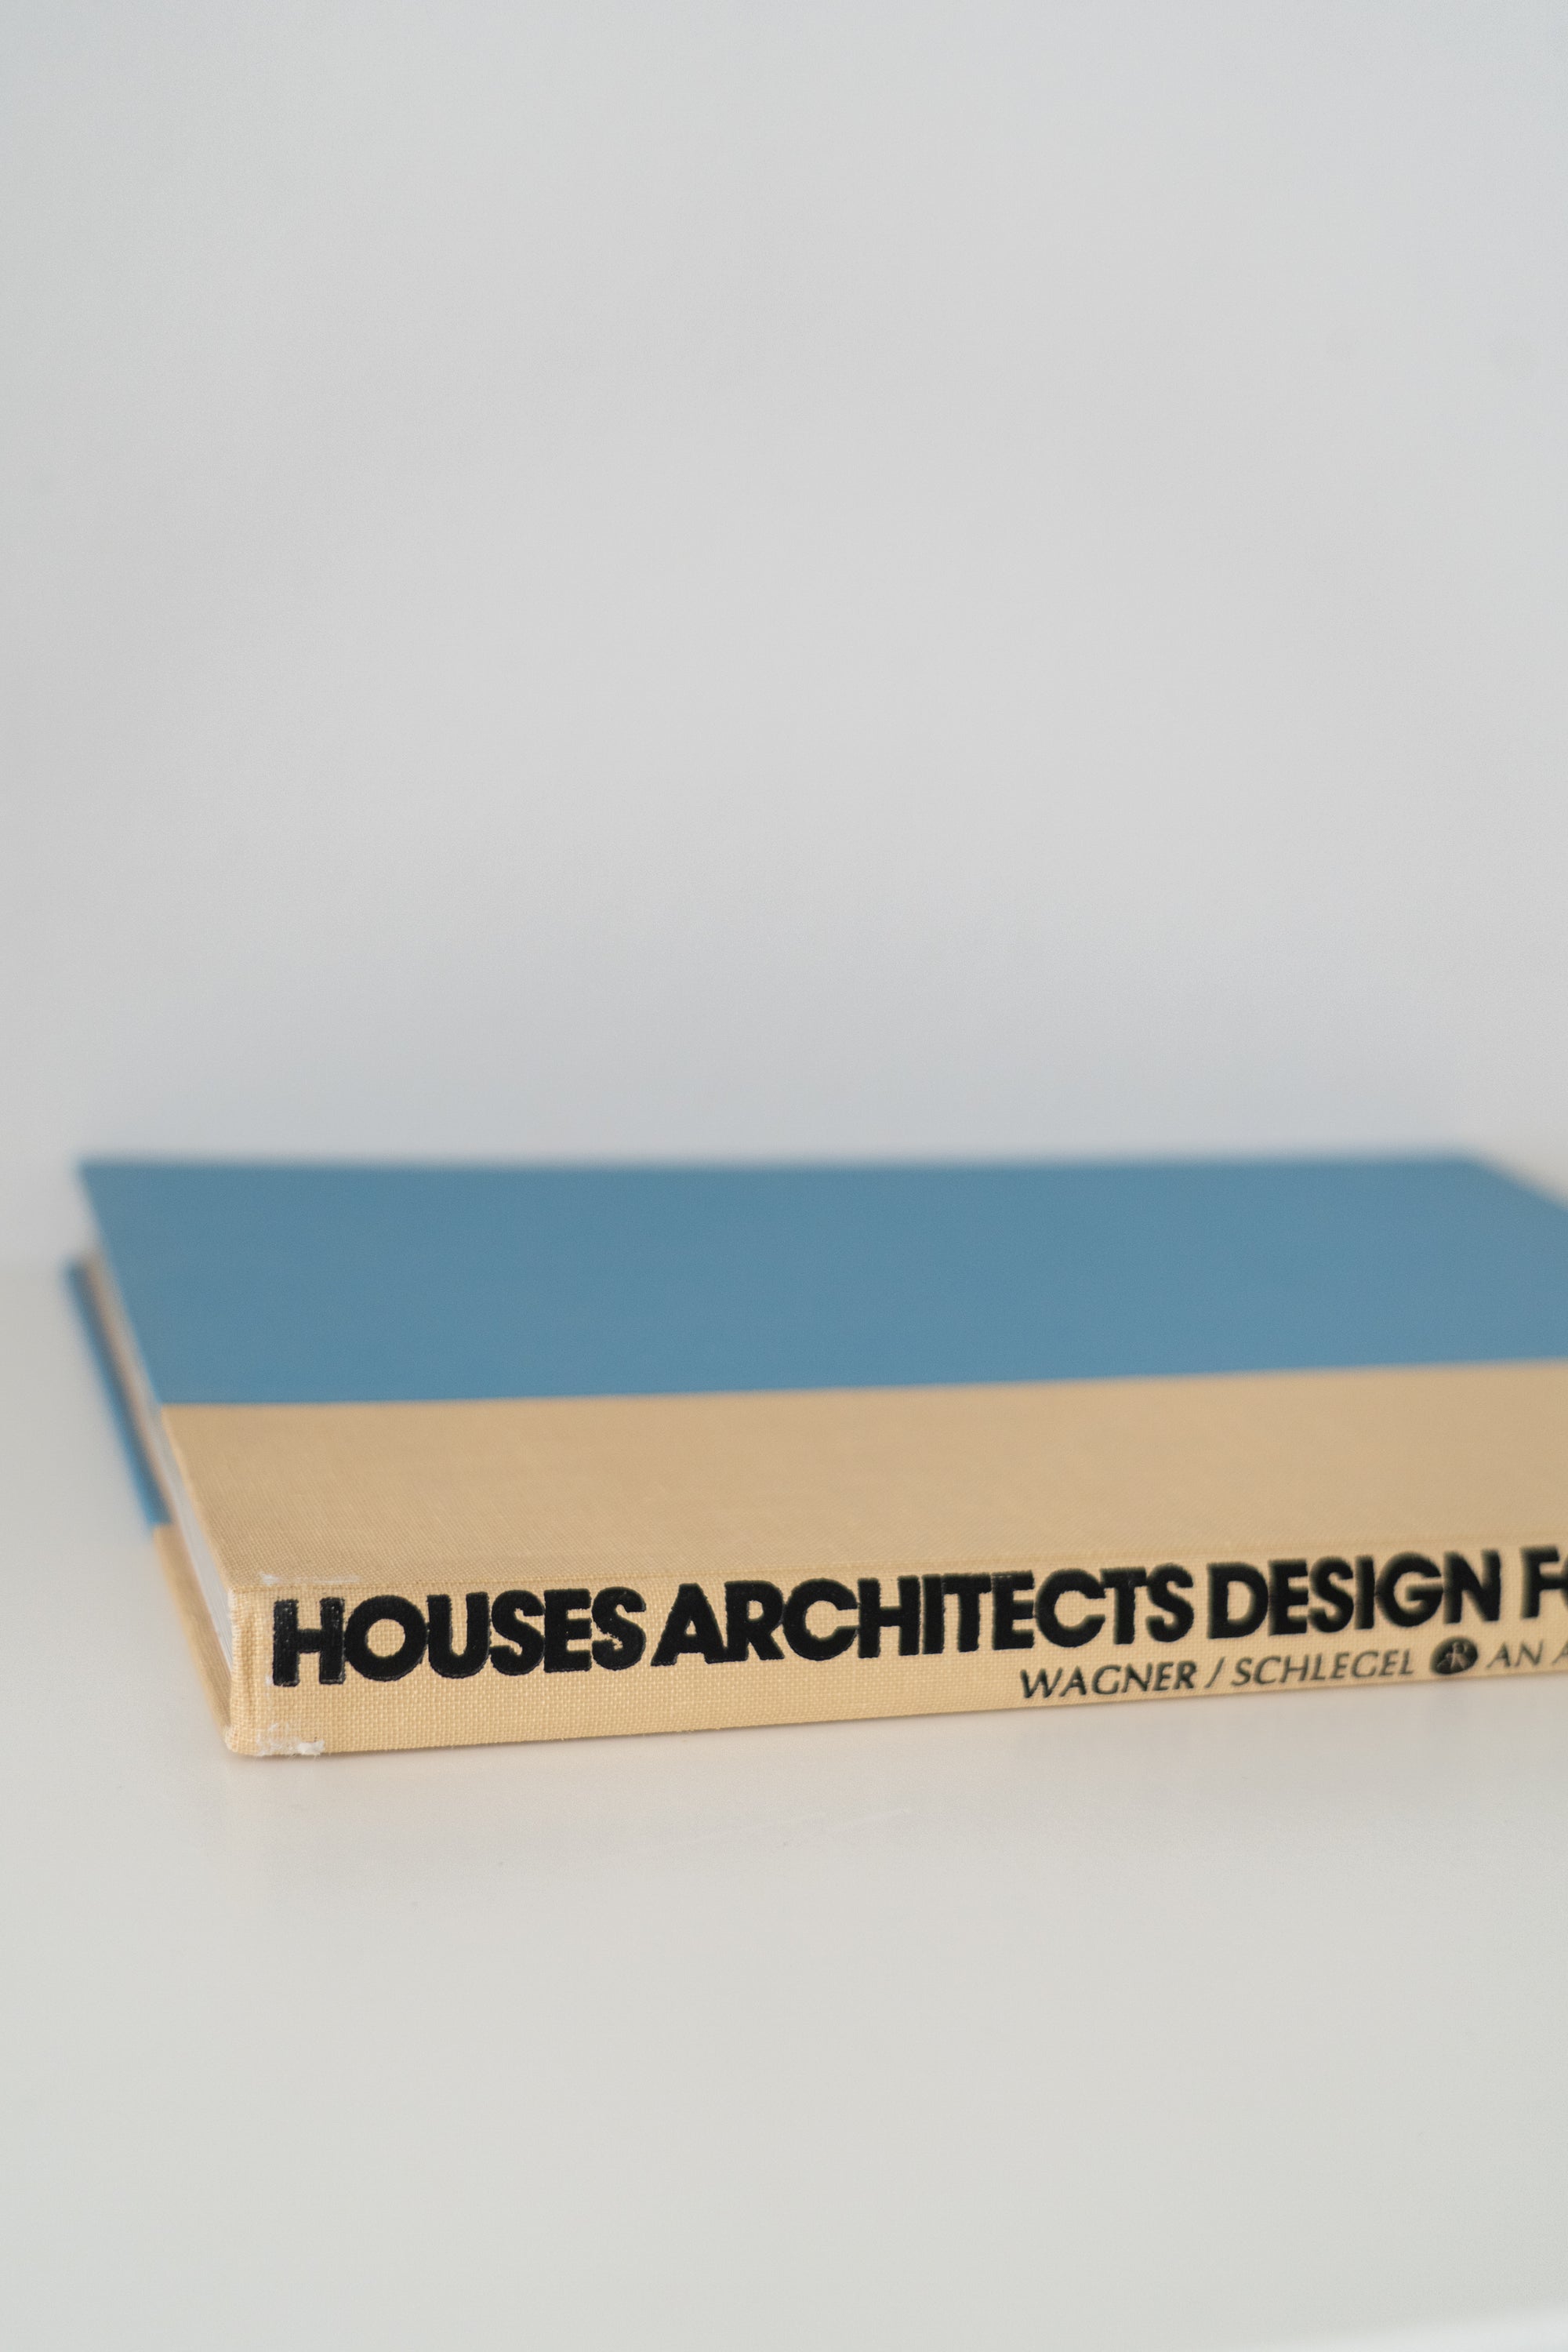 Houses Architects Design for Themselves (1974)